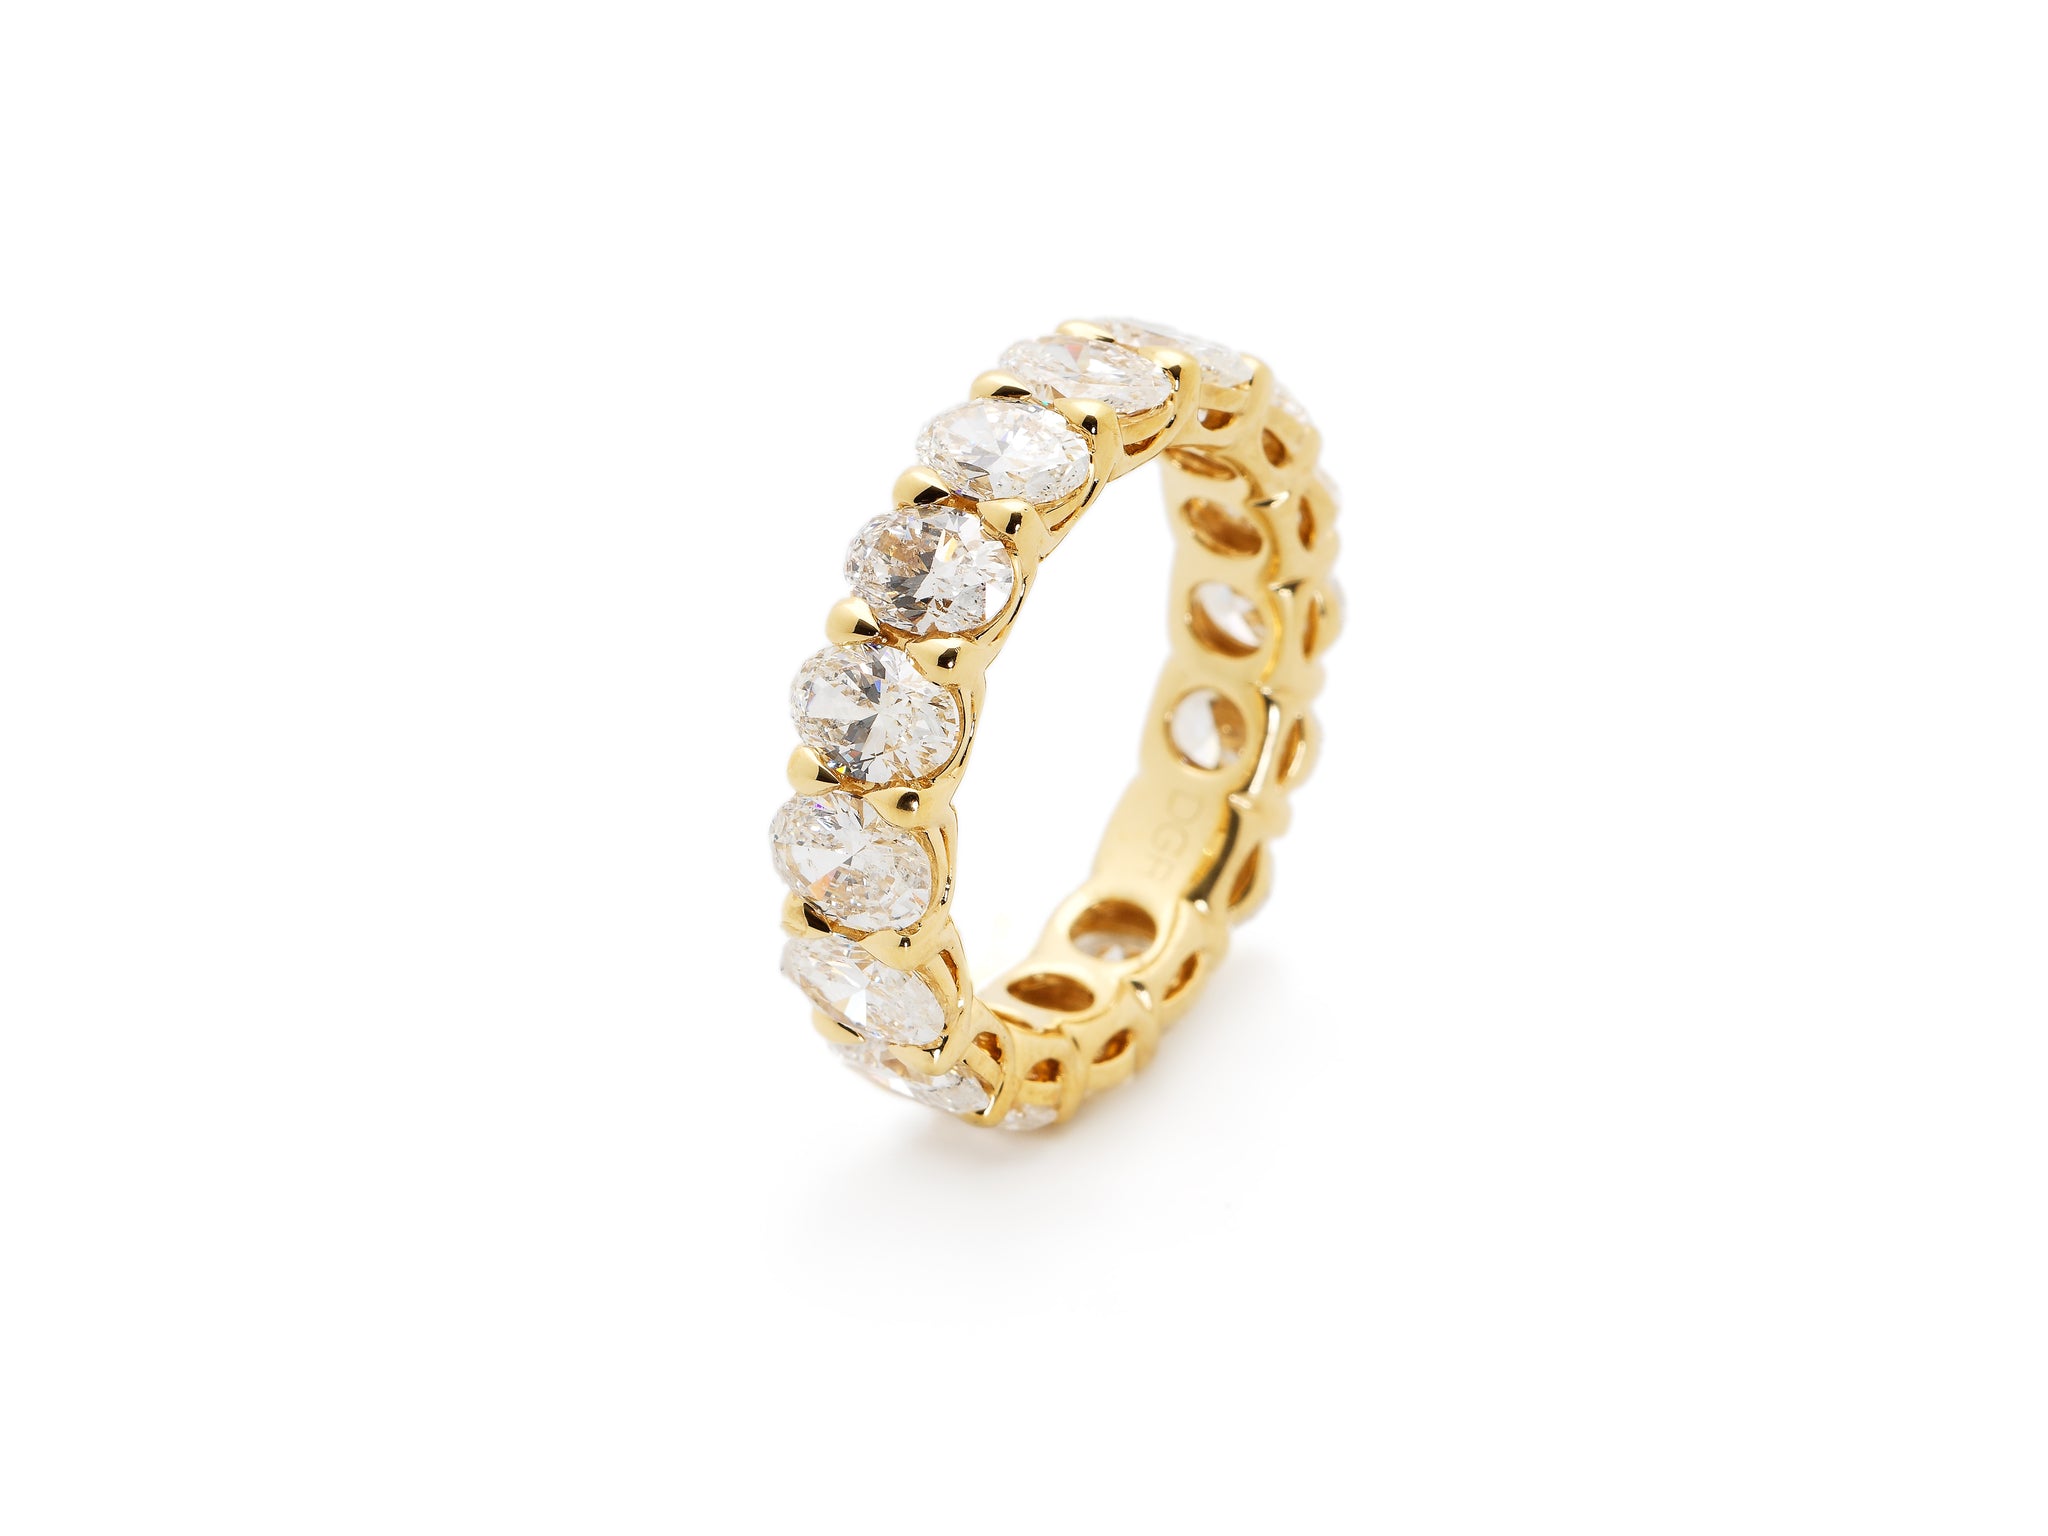 18 krt yellow gold ring set with 16 oval diamonds